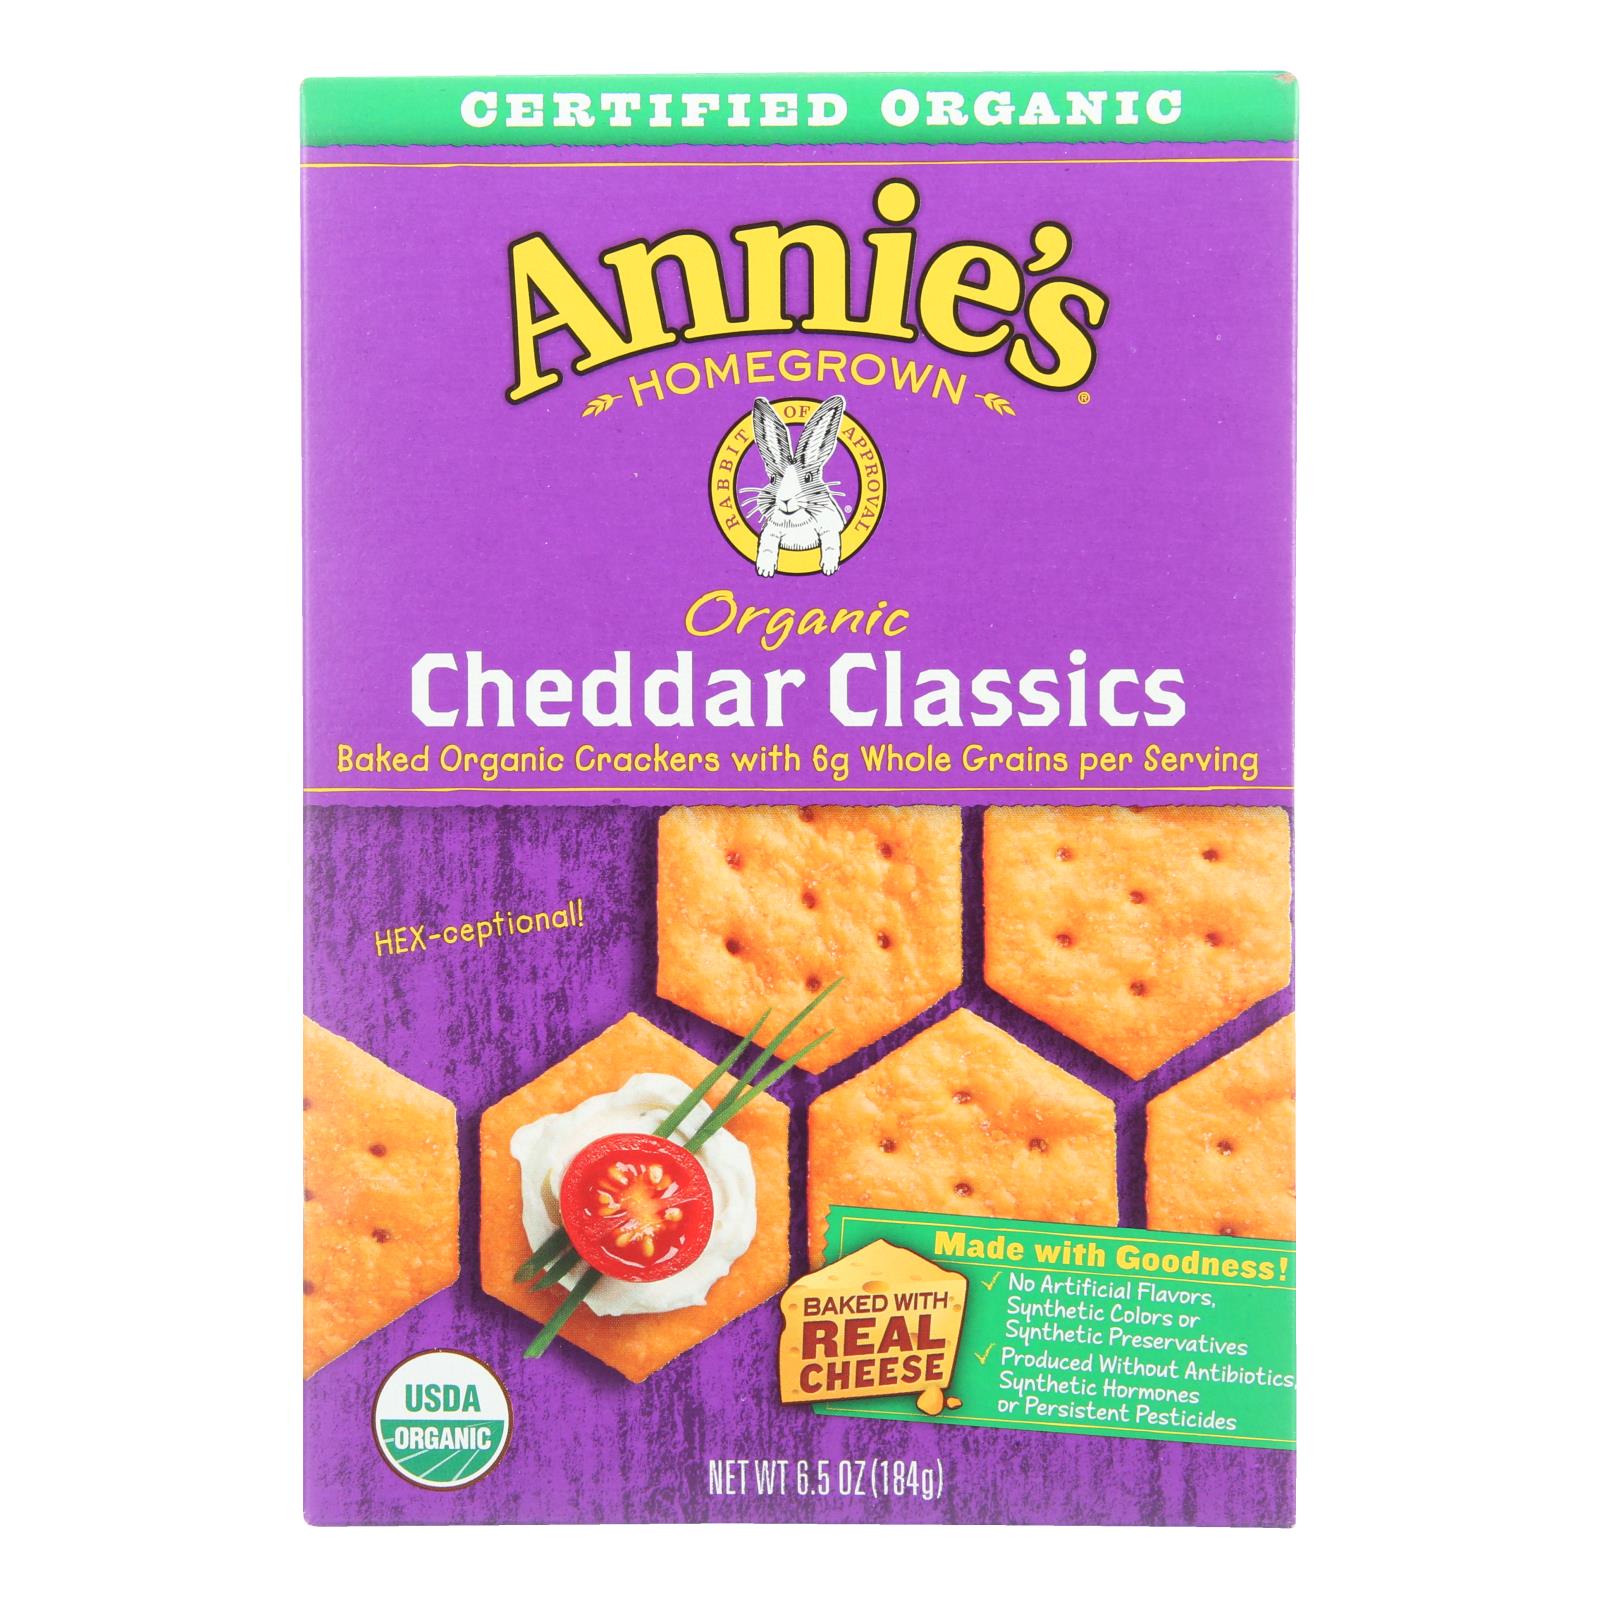 Annie'S Homegrown, Annie's Homegrown Organic Cheddar Classic Crackers - Case of 12 - 6.5 oz. (Pack of 12)